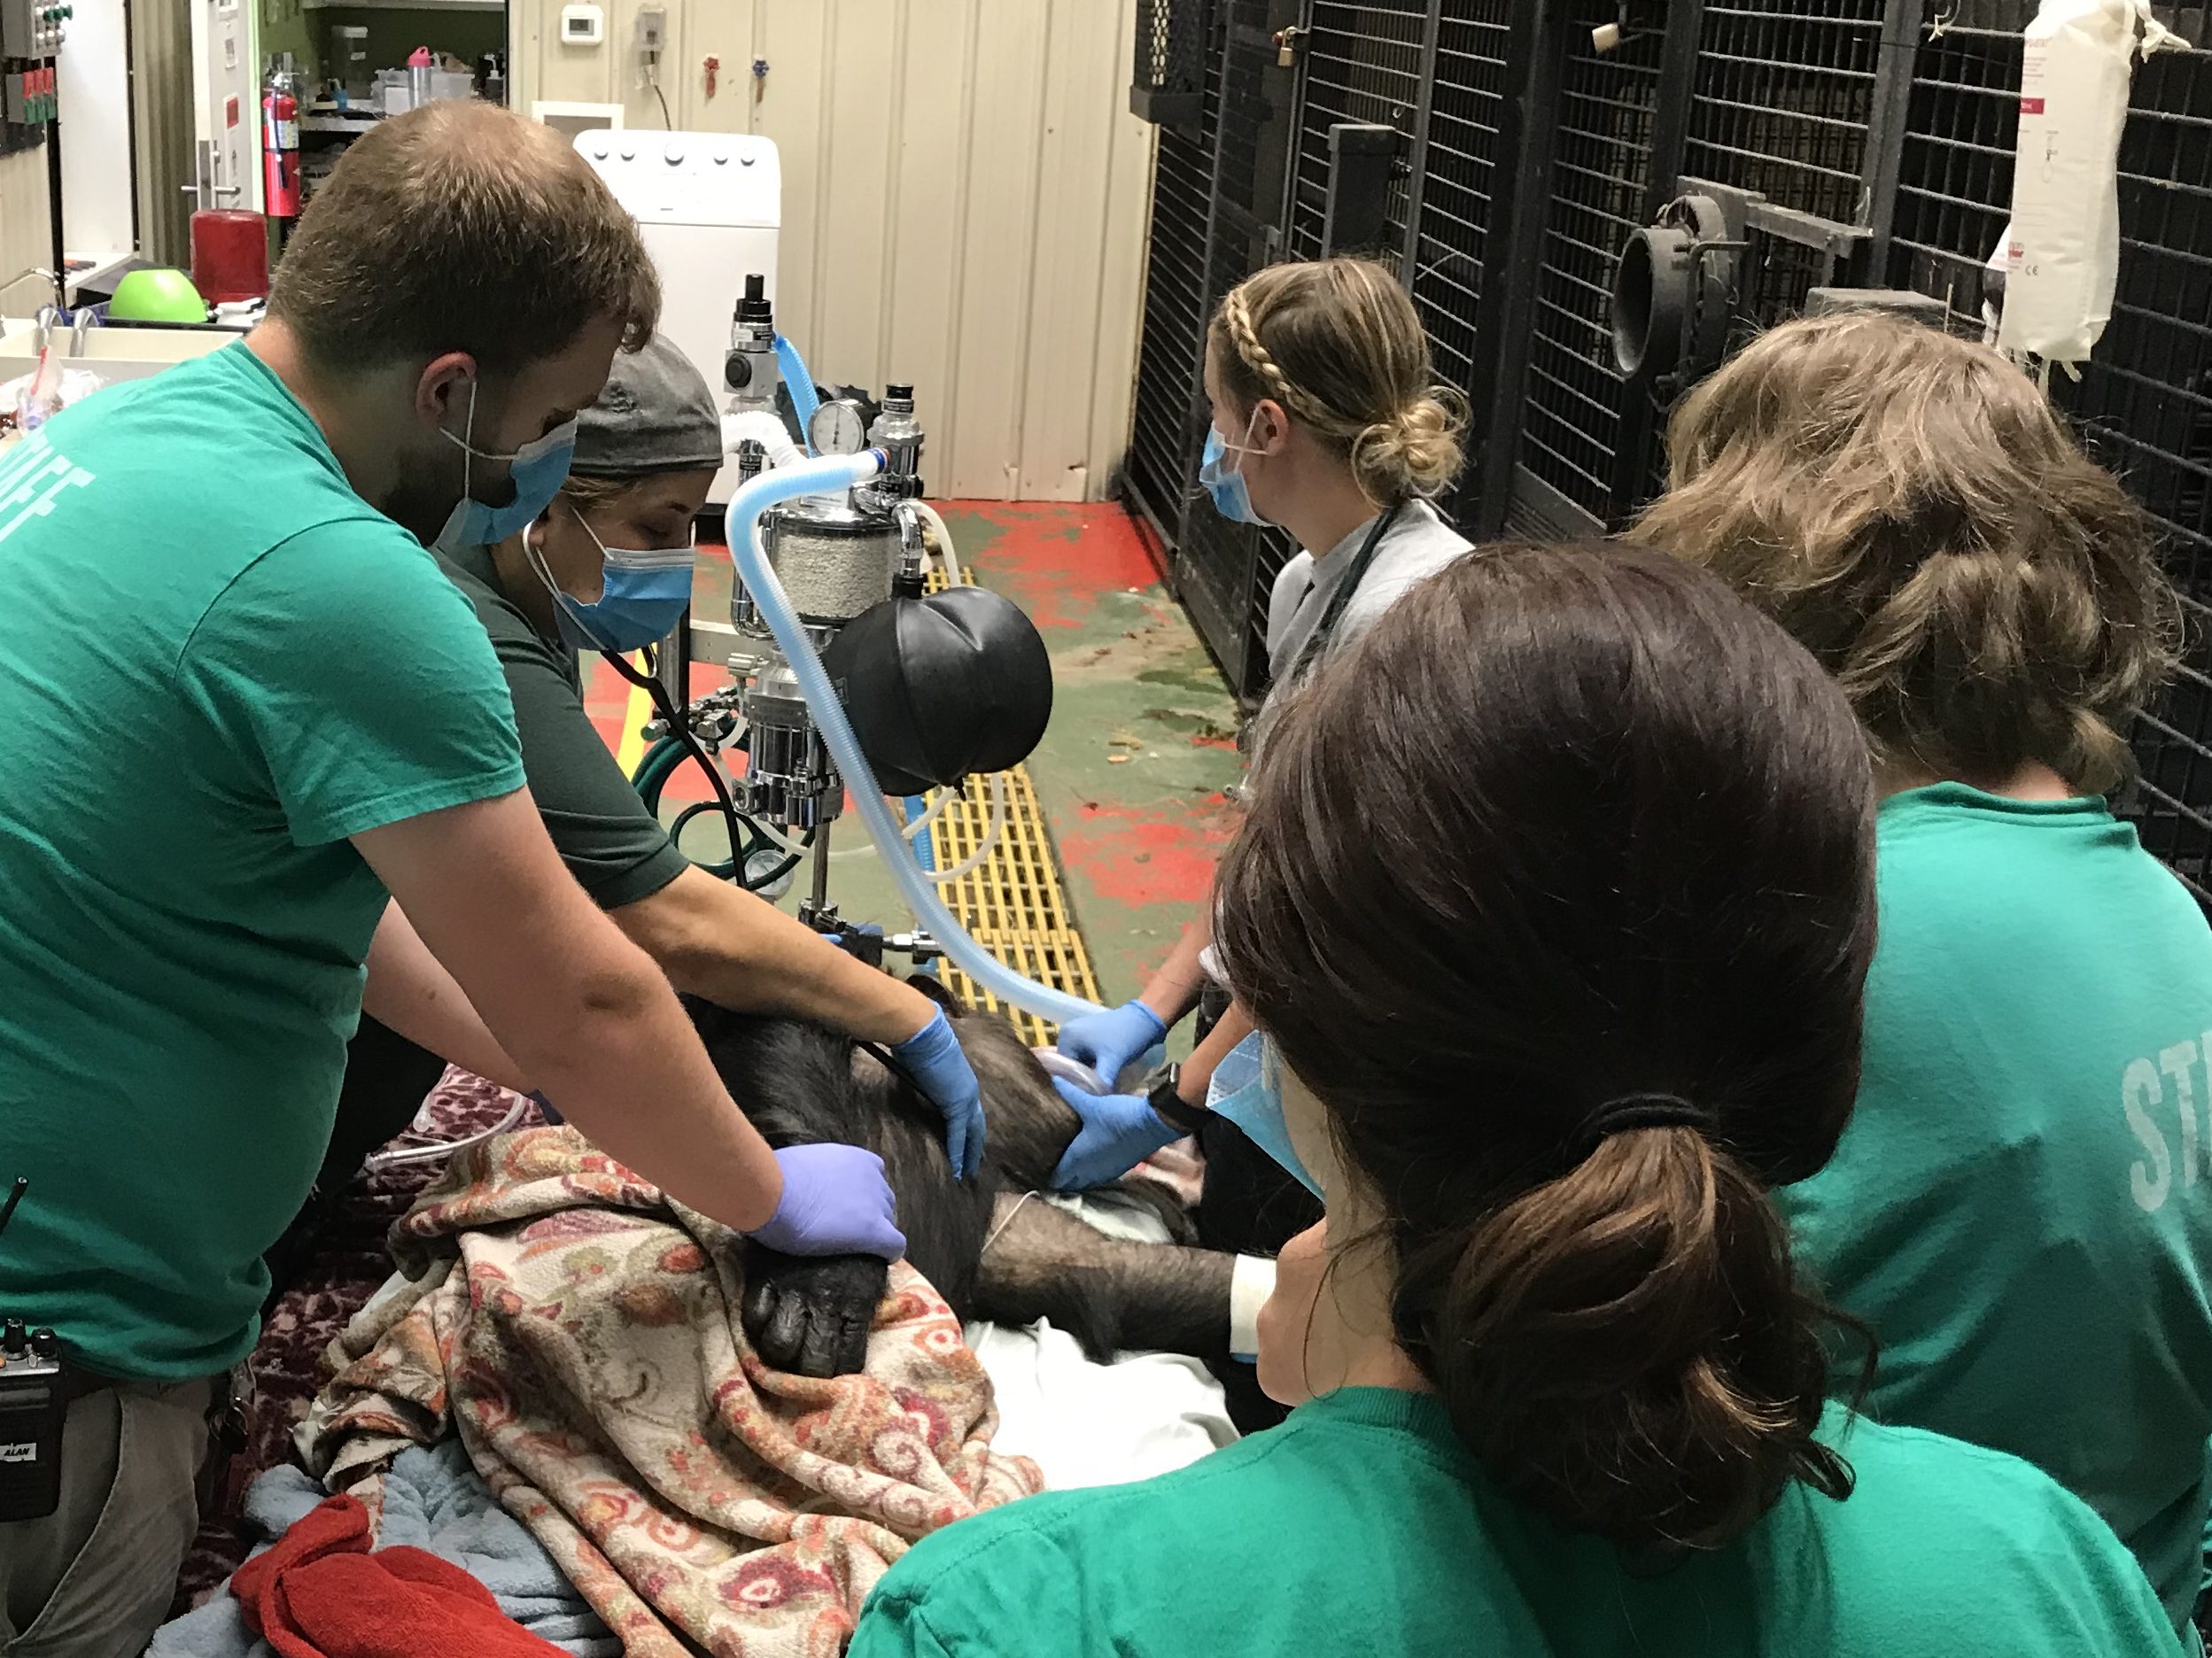 latricia chimpanzee under sedation surrounded by the medical team